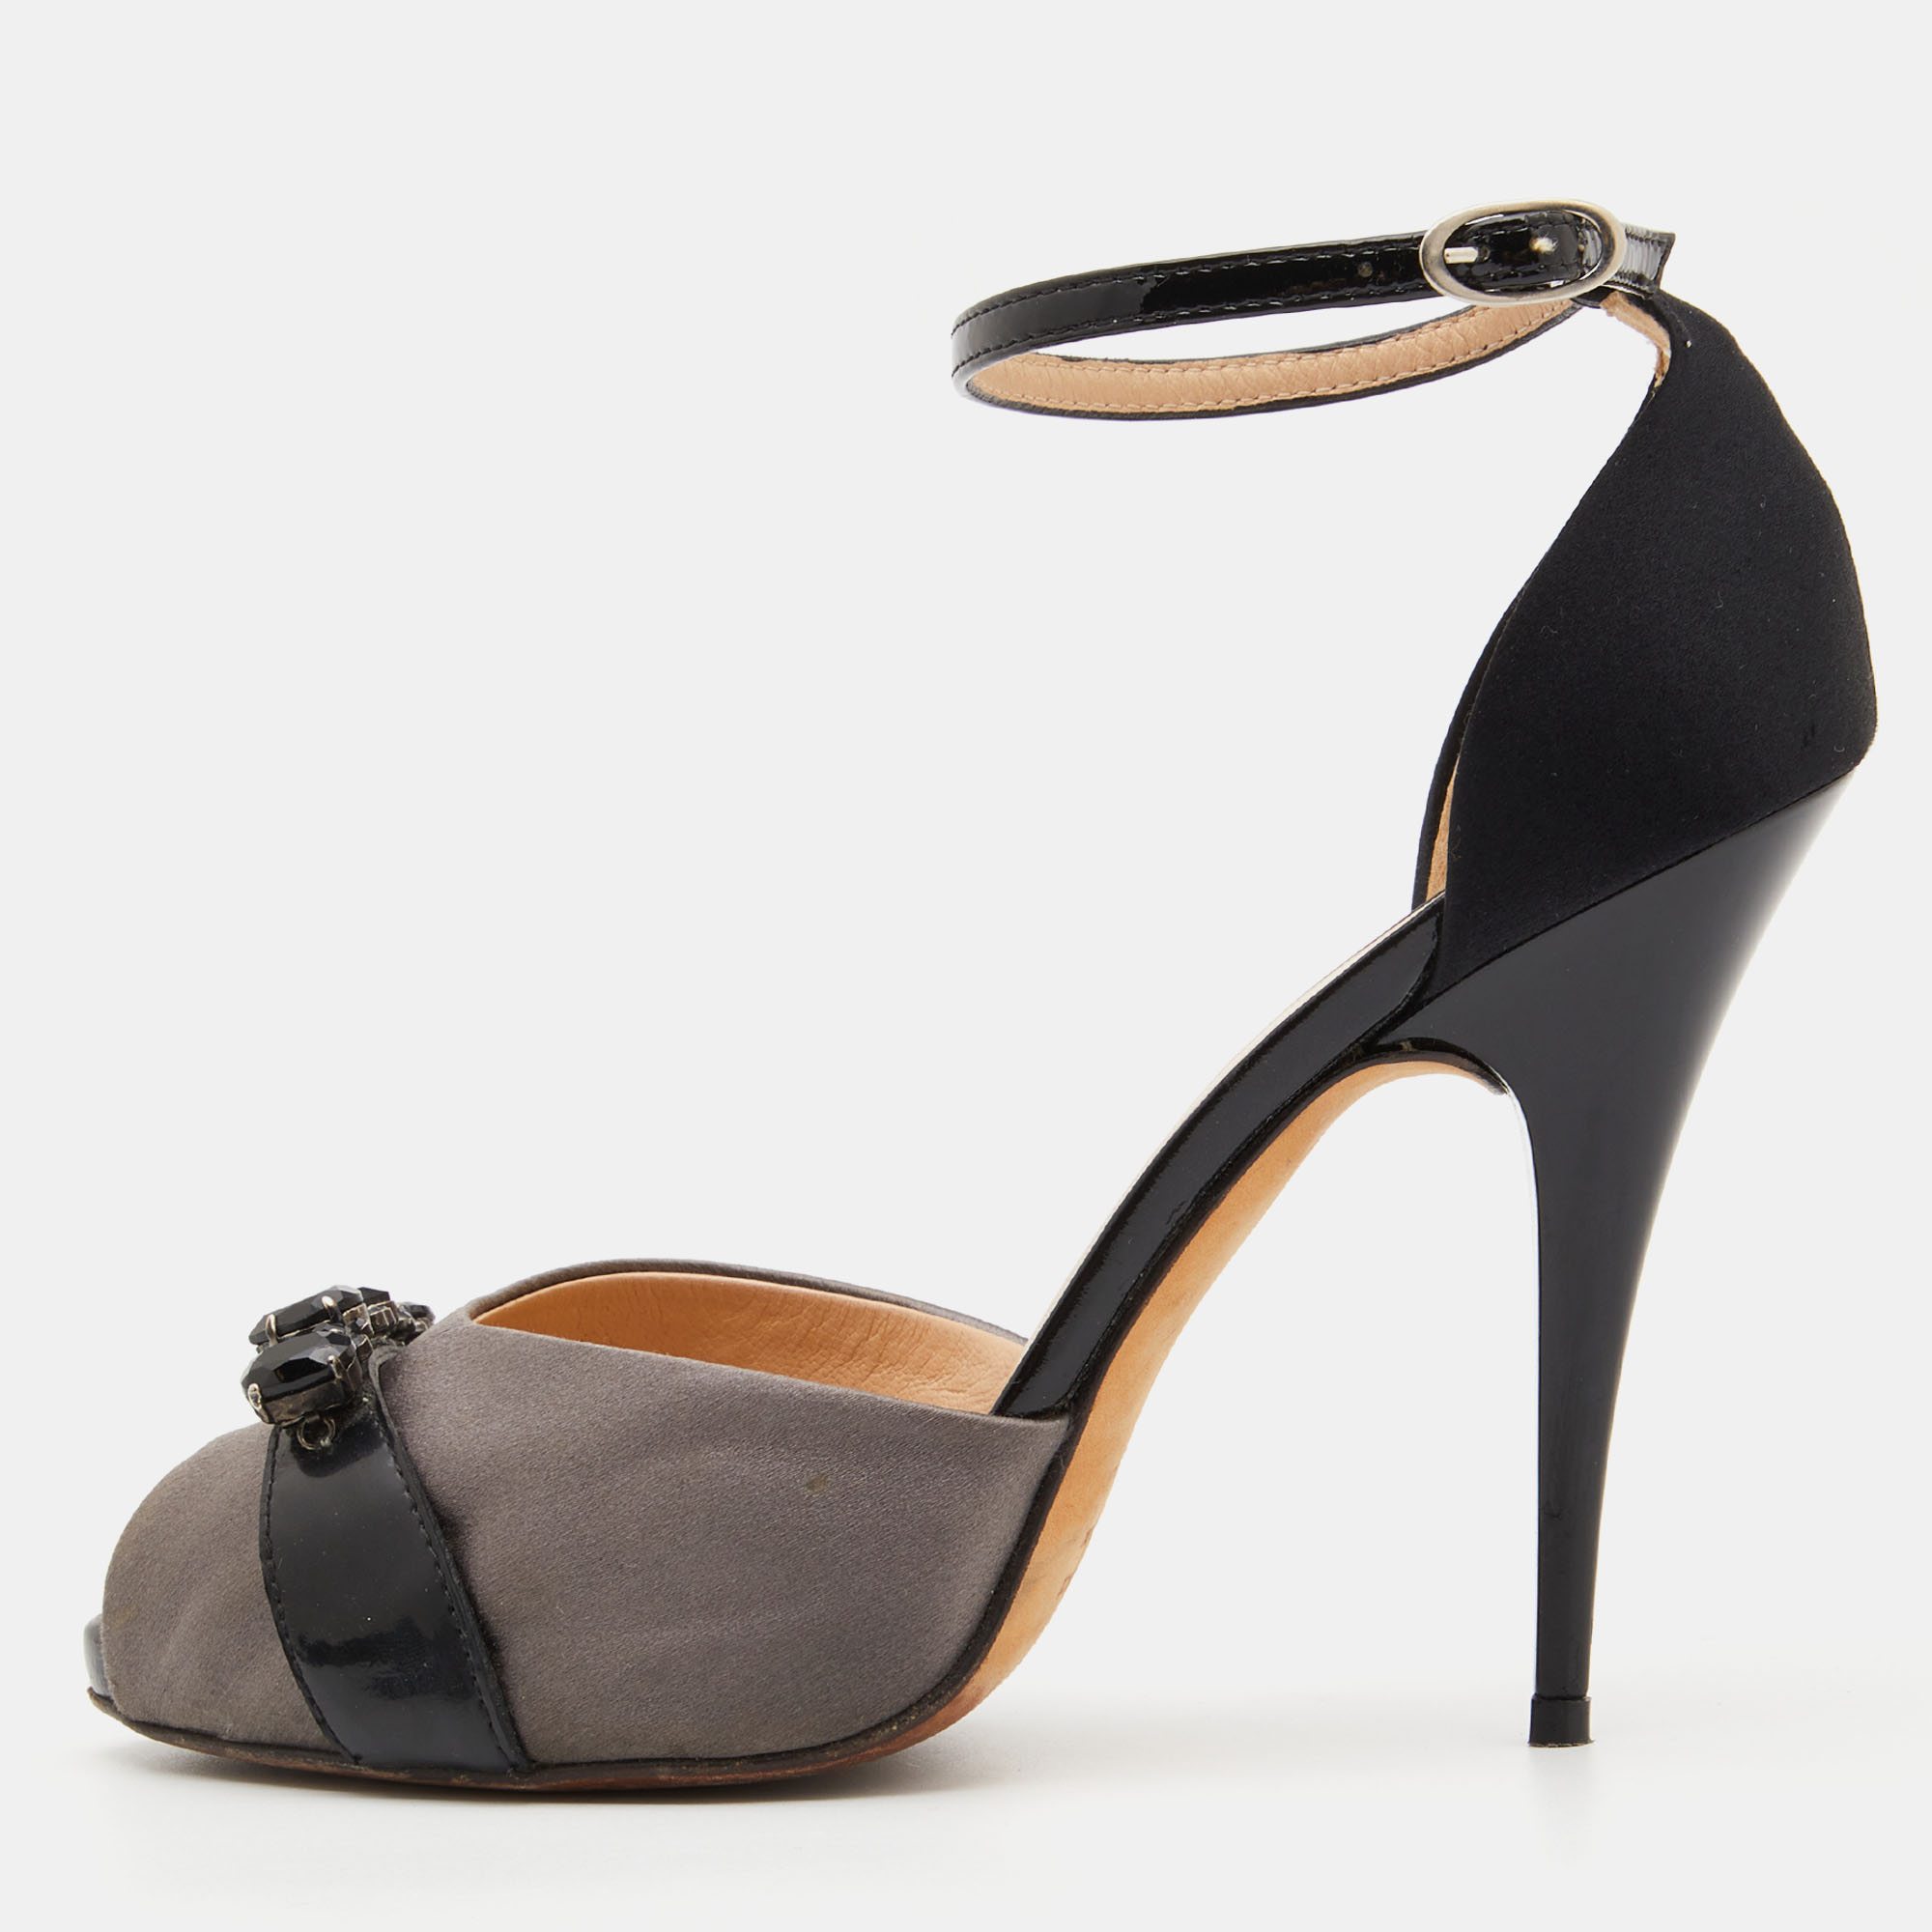 Pre-owned Giuseppe Zanotti Grey/black Satin And Patent Leather Crystal Embellished Ankle Strap Sandals Size 37.5